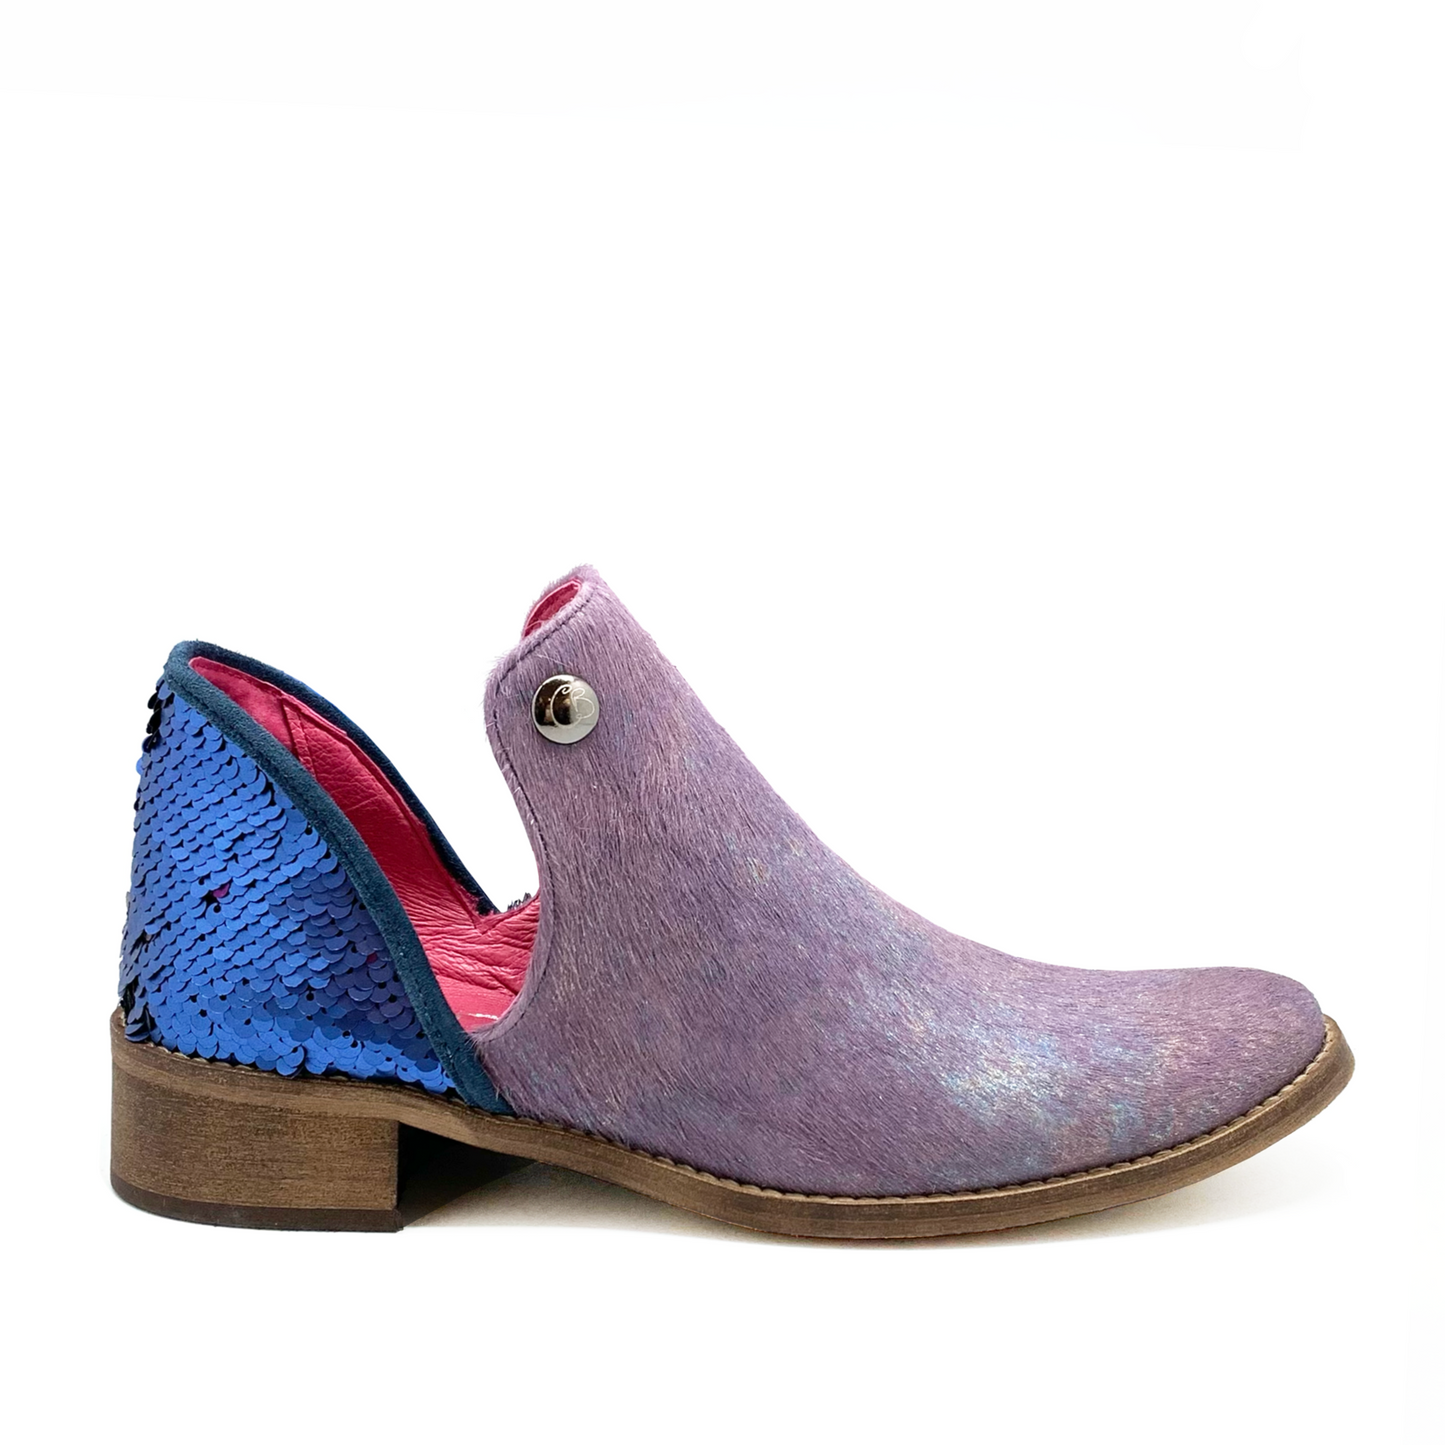 Zippette -Lilac cowhide ankle boot